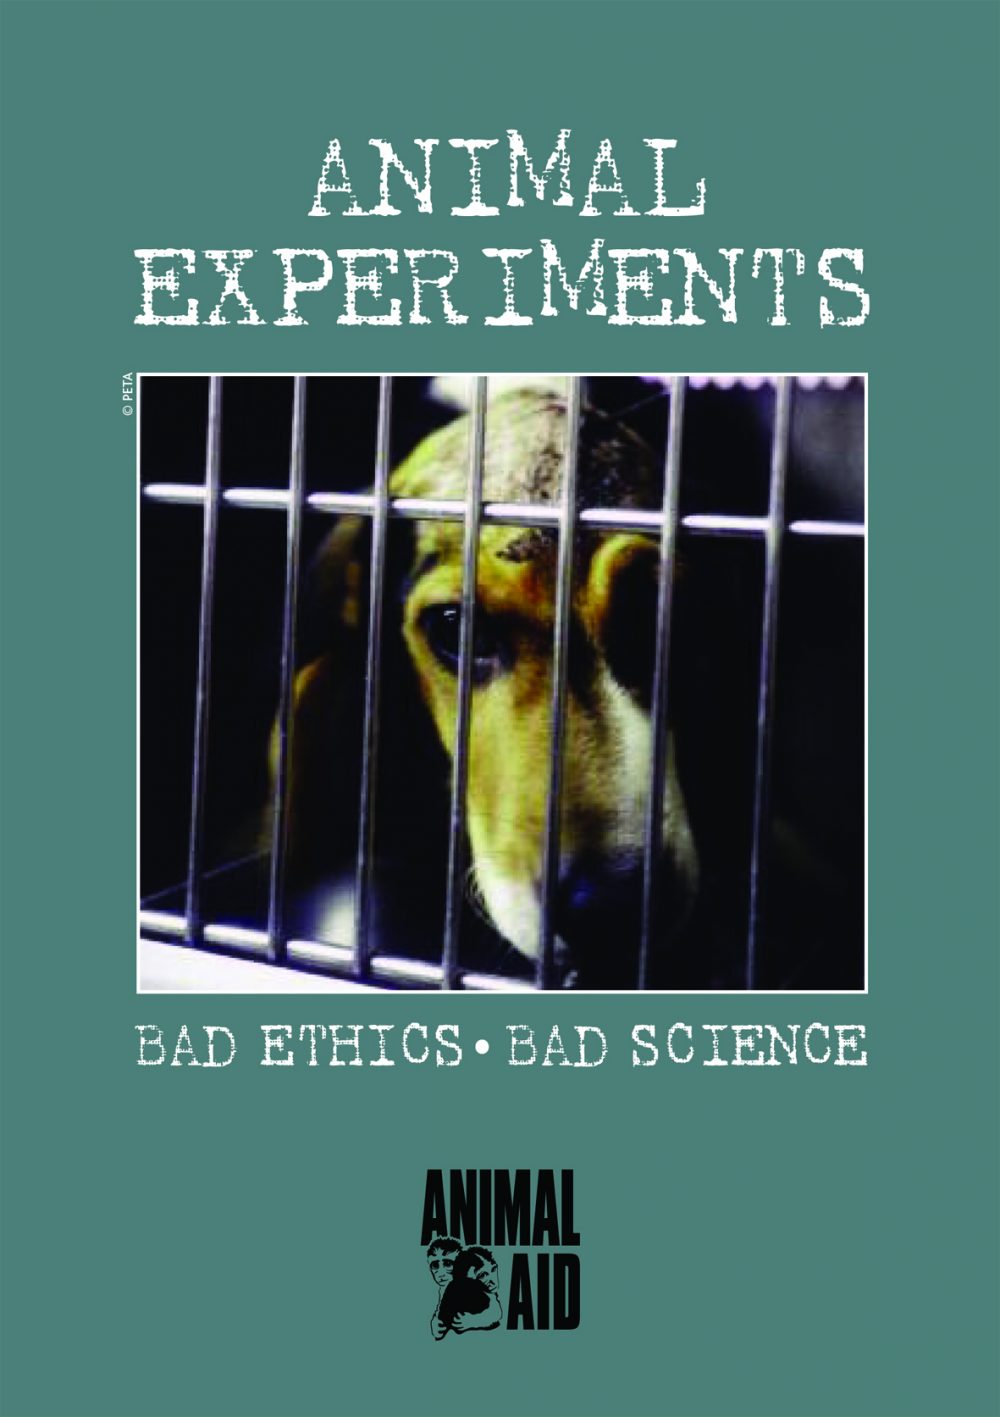 Bad Ethics Bad Science Booklet cover Animal Aid